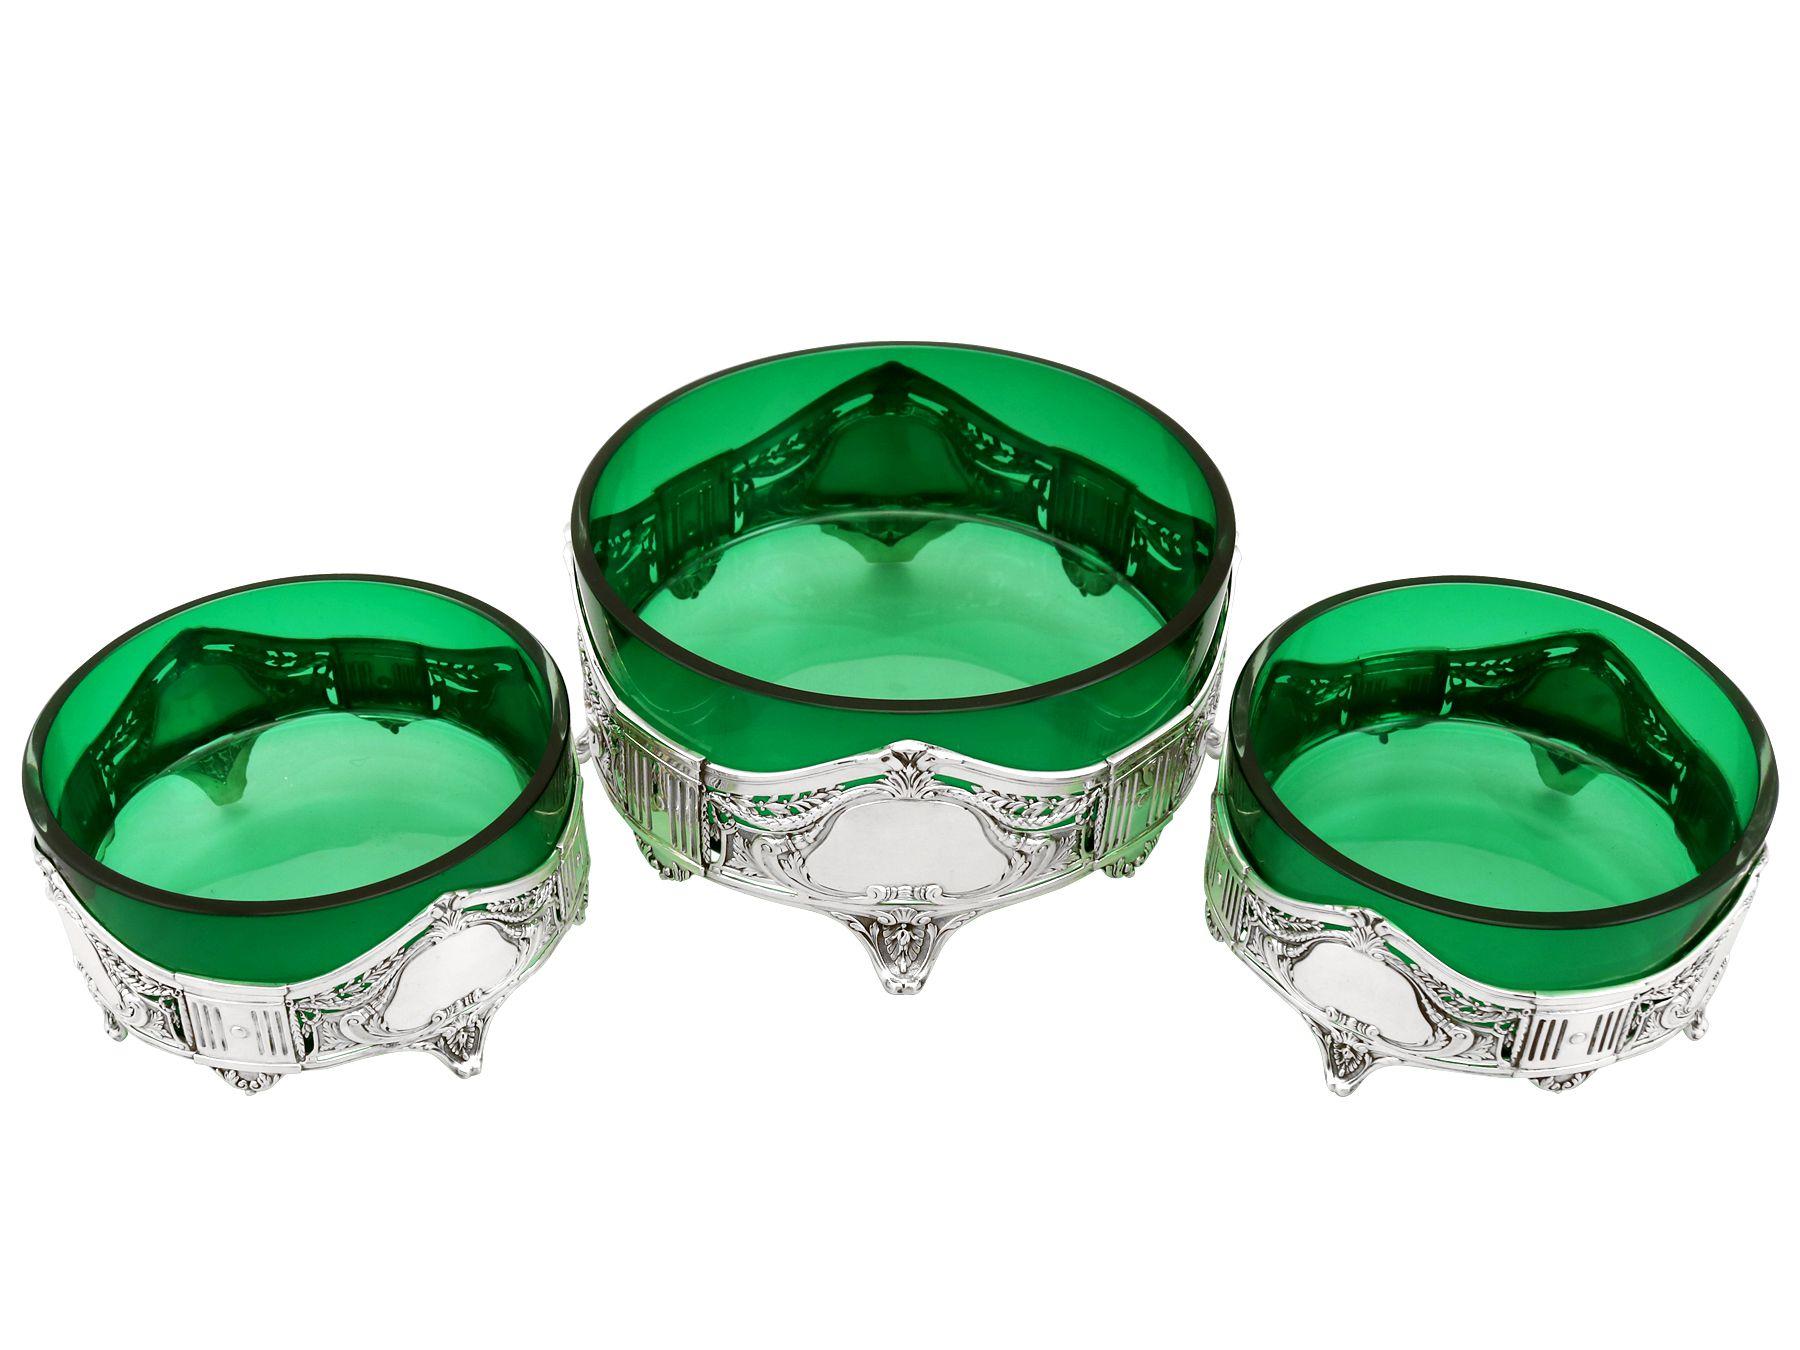 A fine and impressive suite of three antique German silver and green glass dishes in the Art Nouveau style, an addition to our silver mounted glass collection

These fine antique German silver and green glass dishes have a circular shaped form